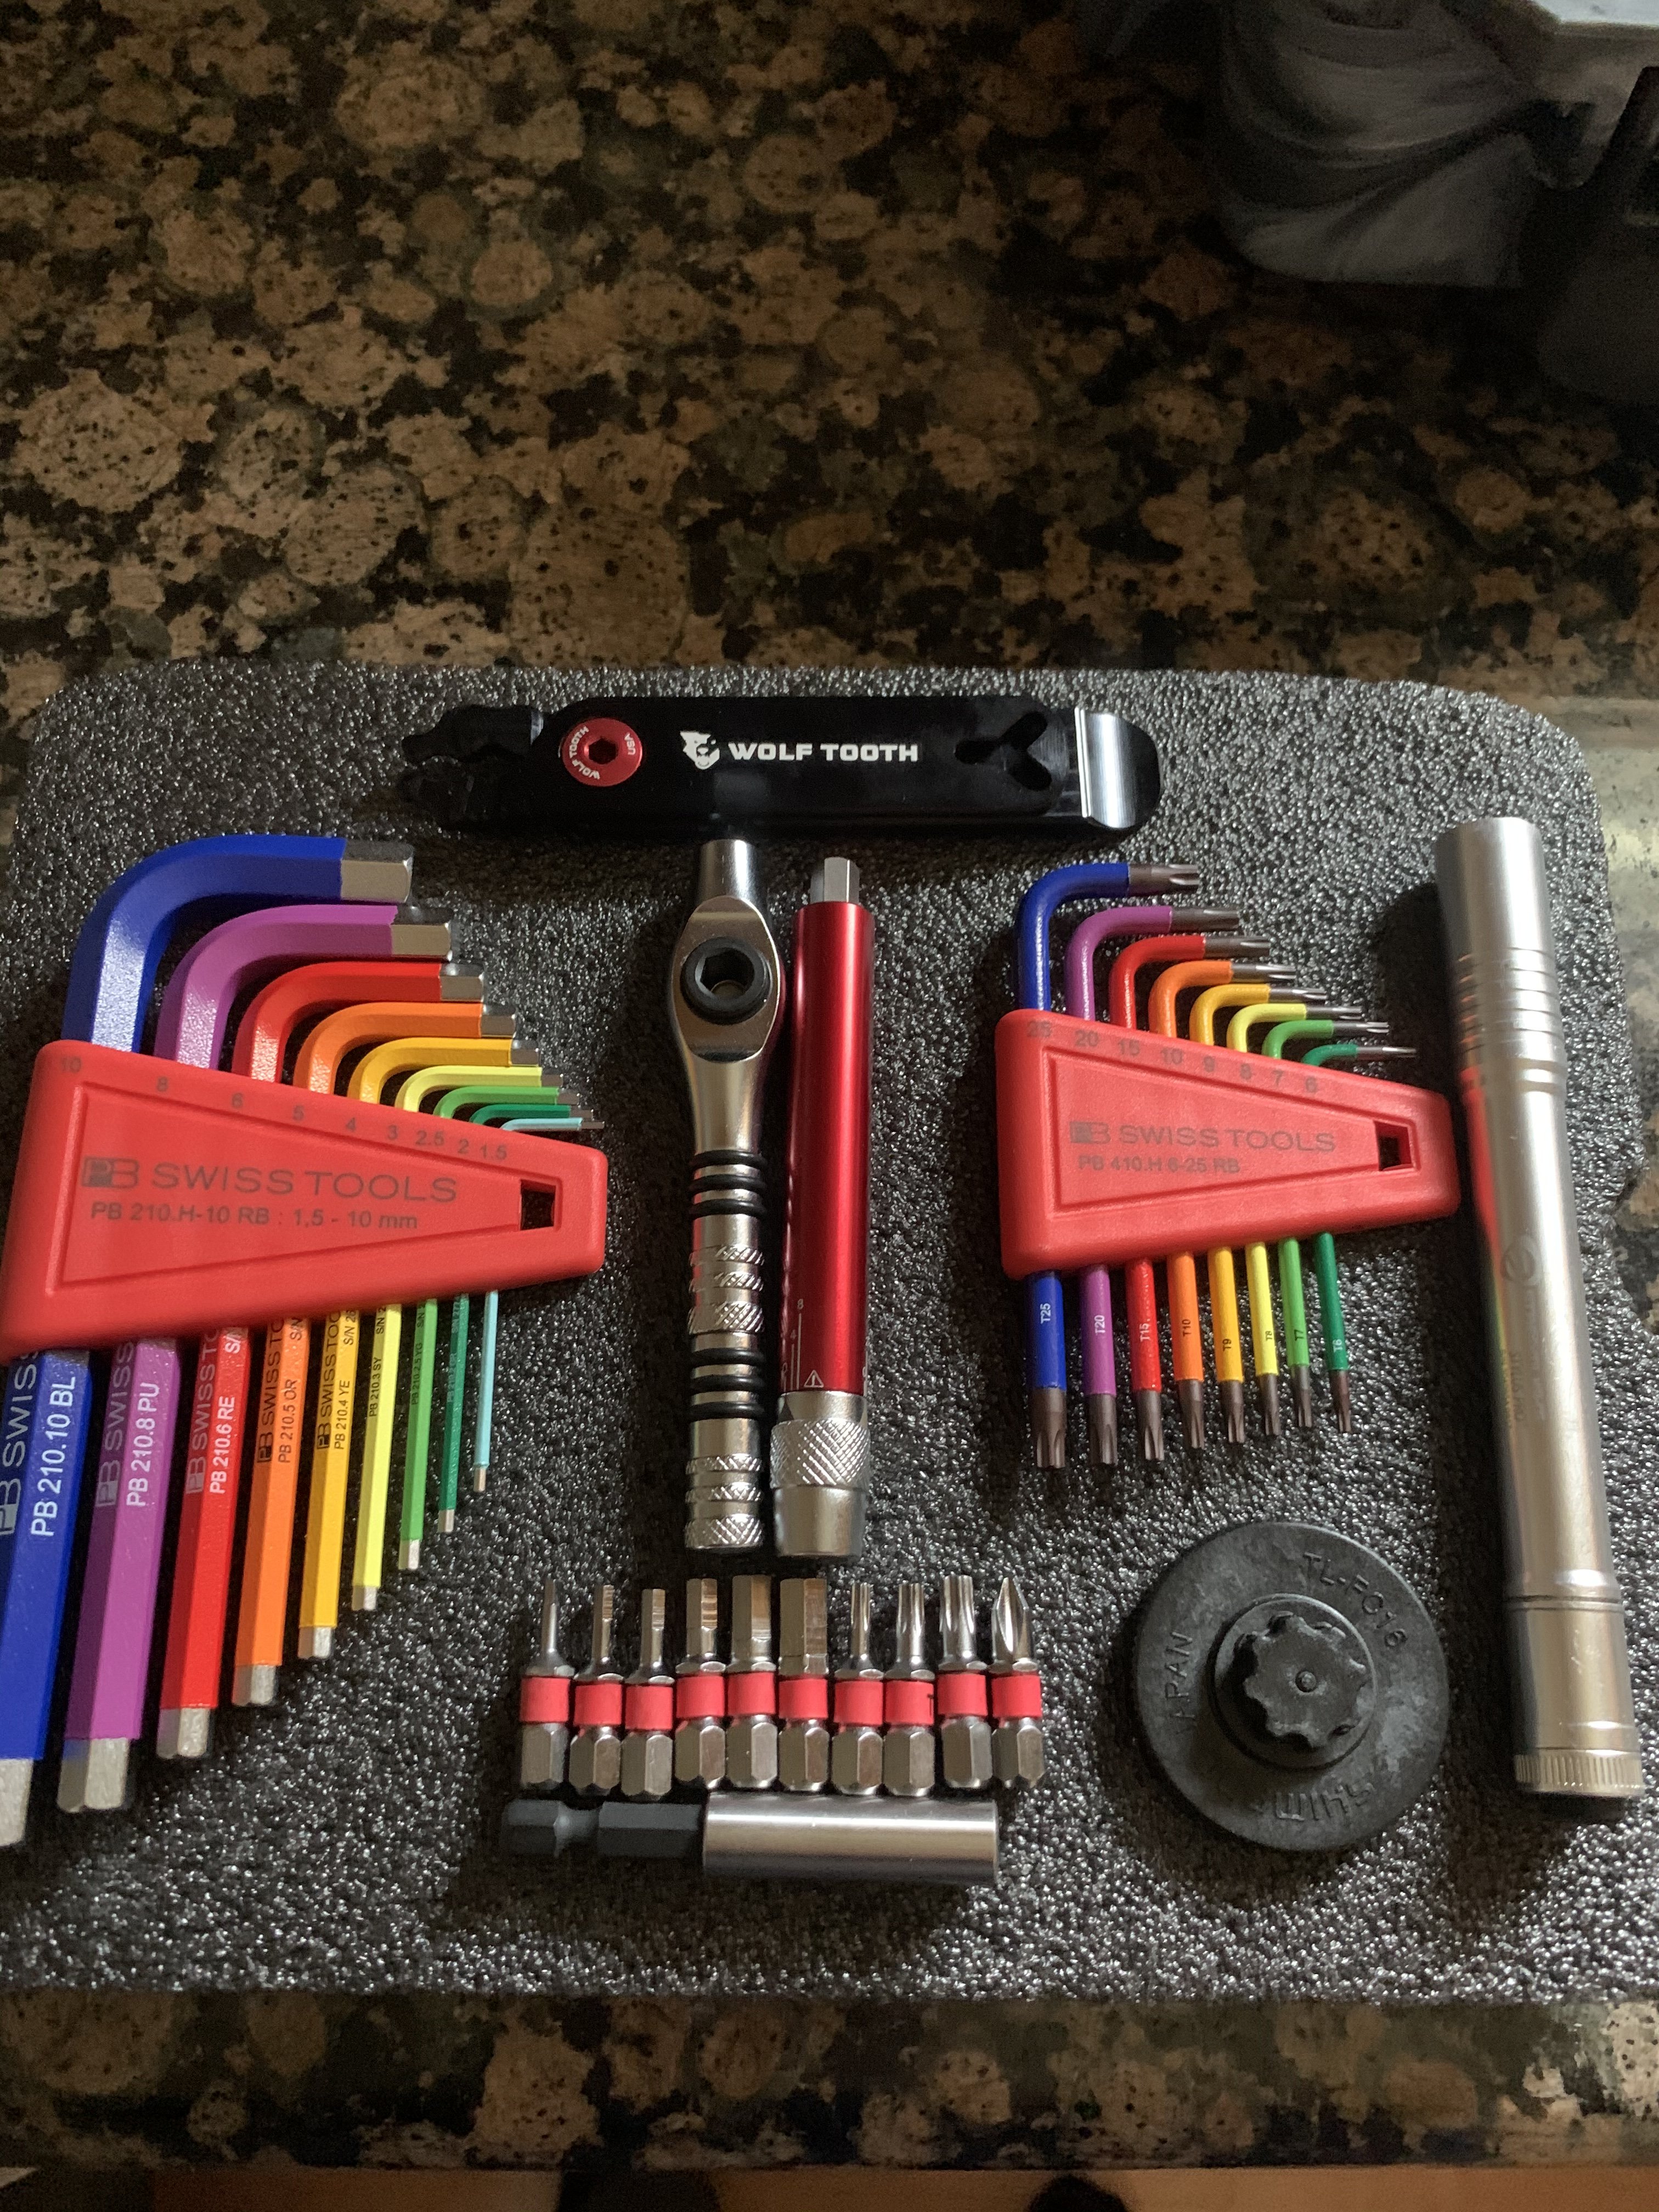 Toolbox Foam inserts - Things You've Made - V1 Engineering Forum